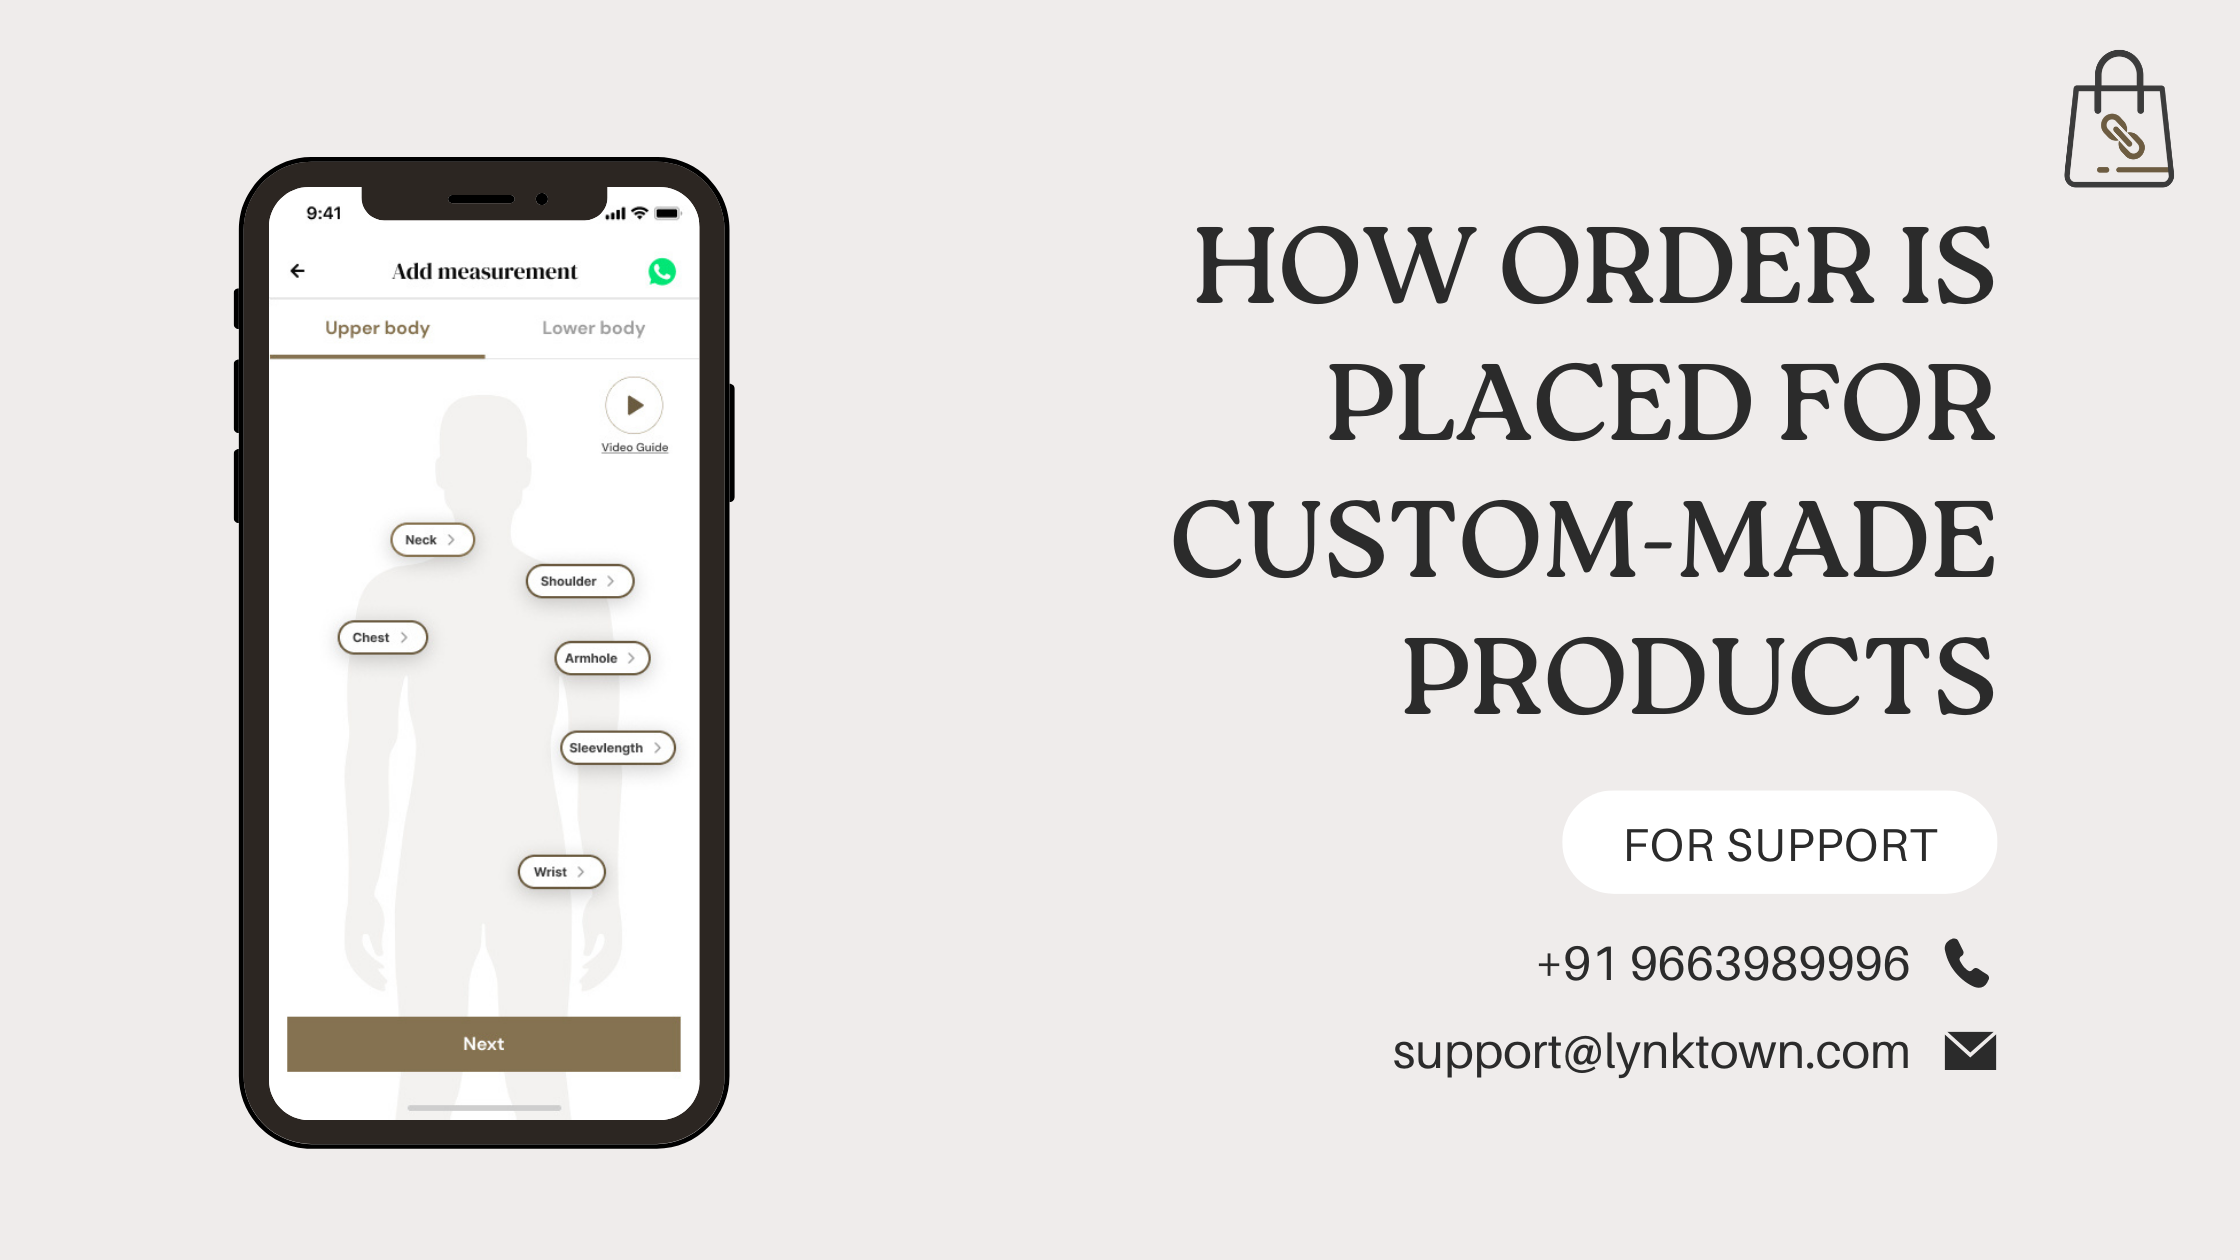 How an order is placed by a customer for custom-made products?